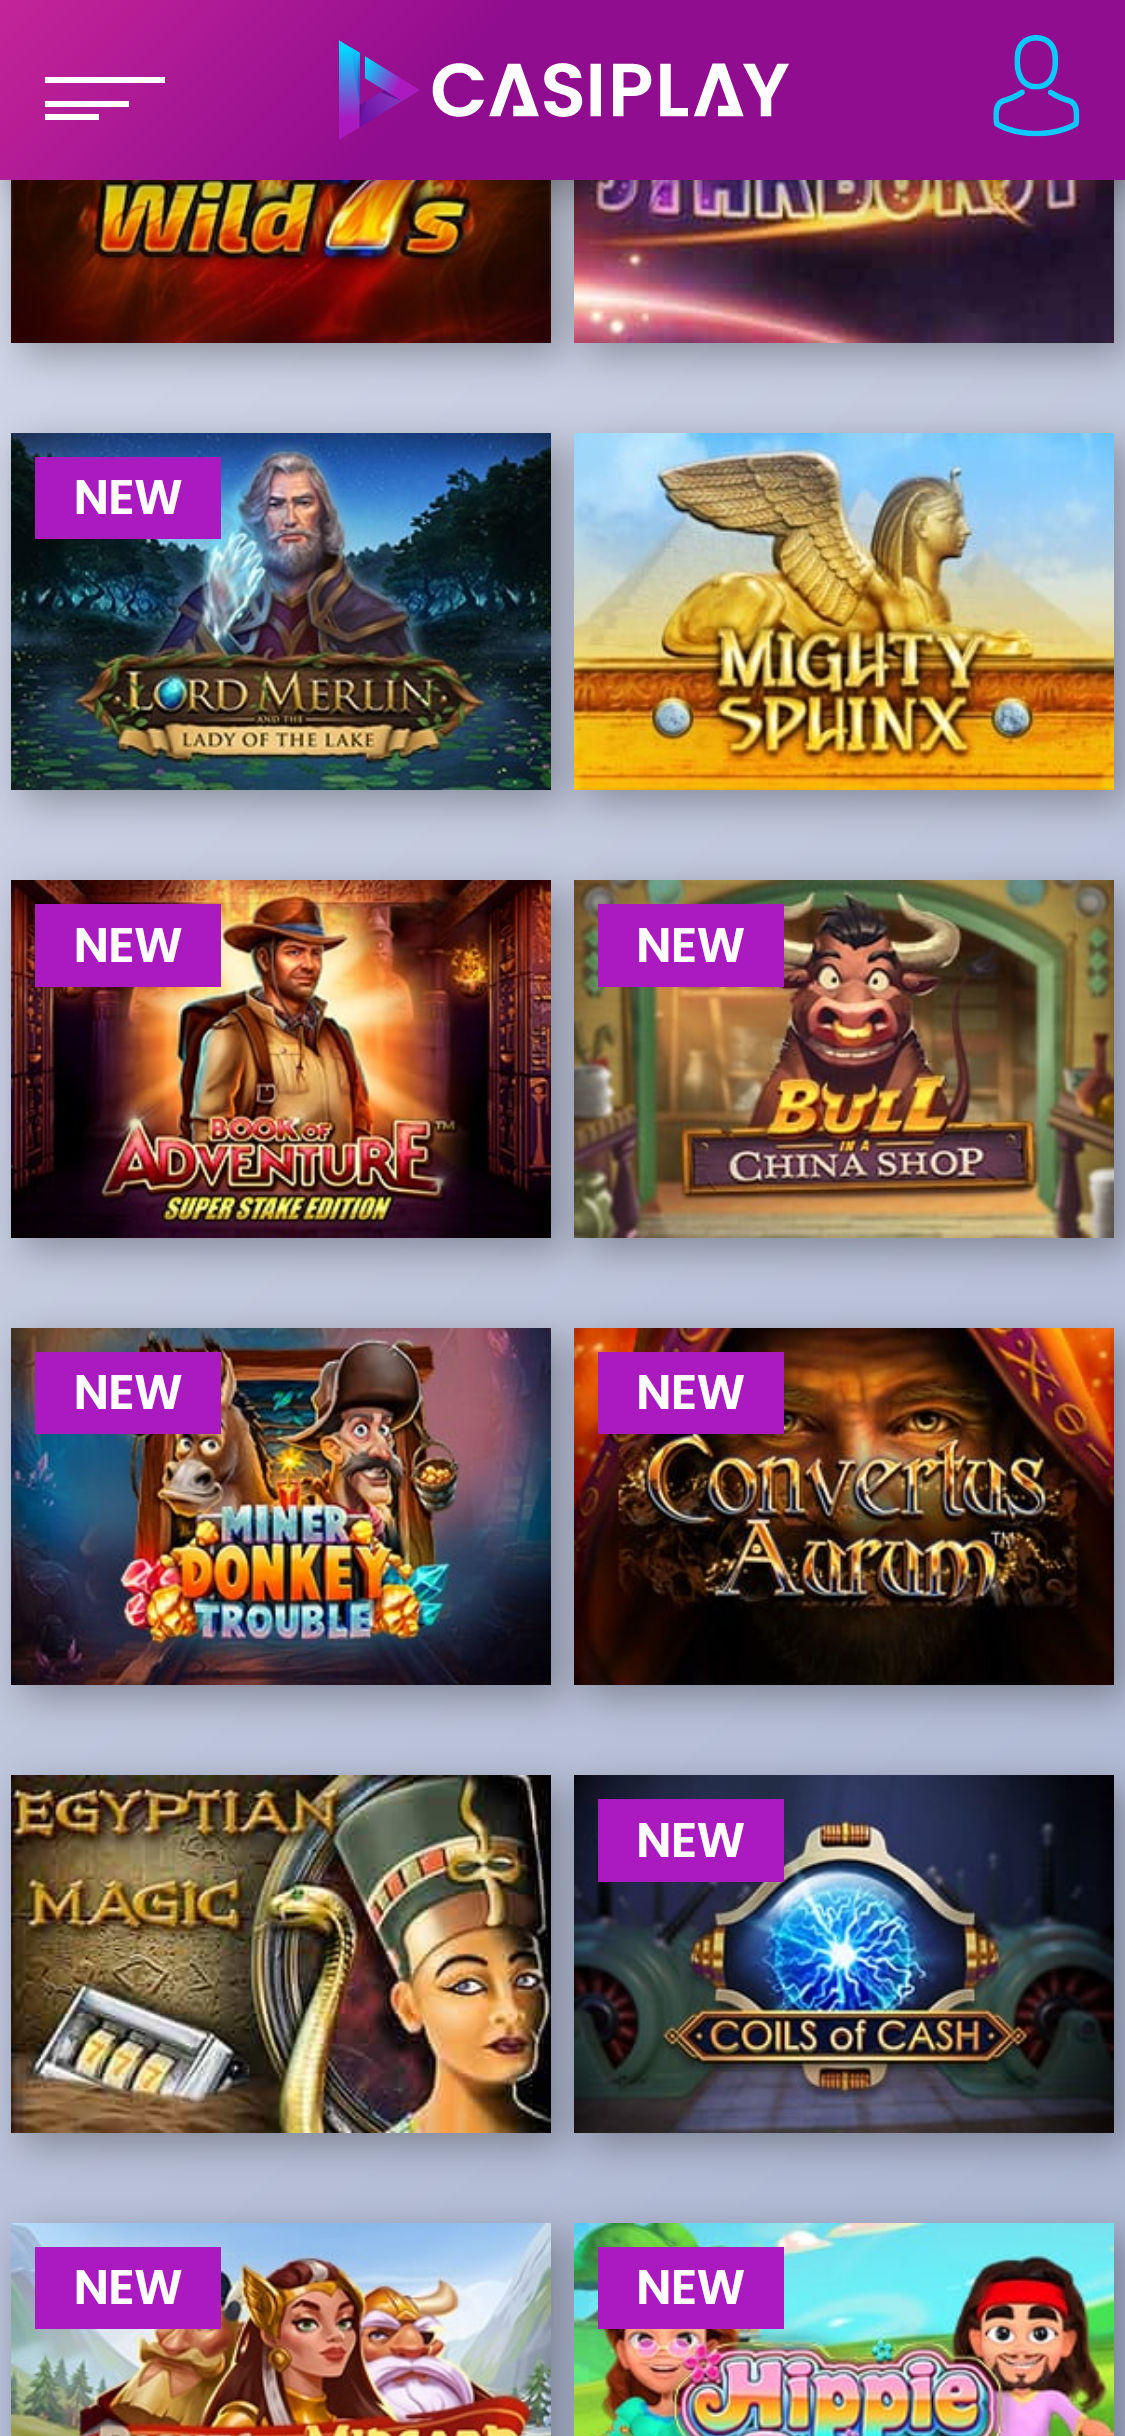 Casiplay Casino Mobile Games Review